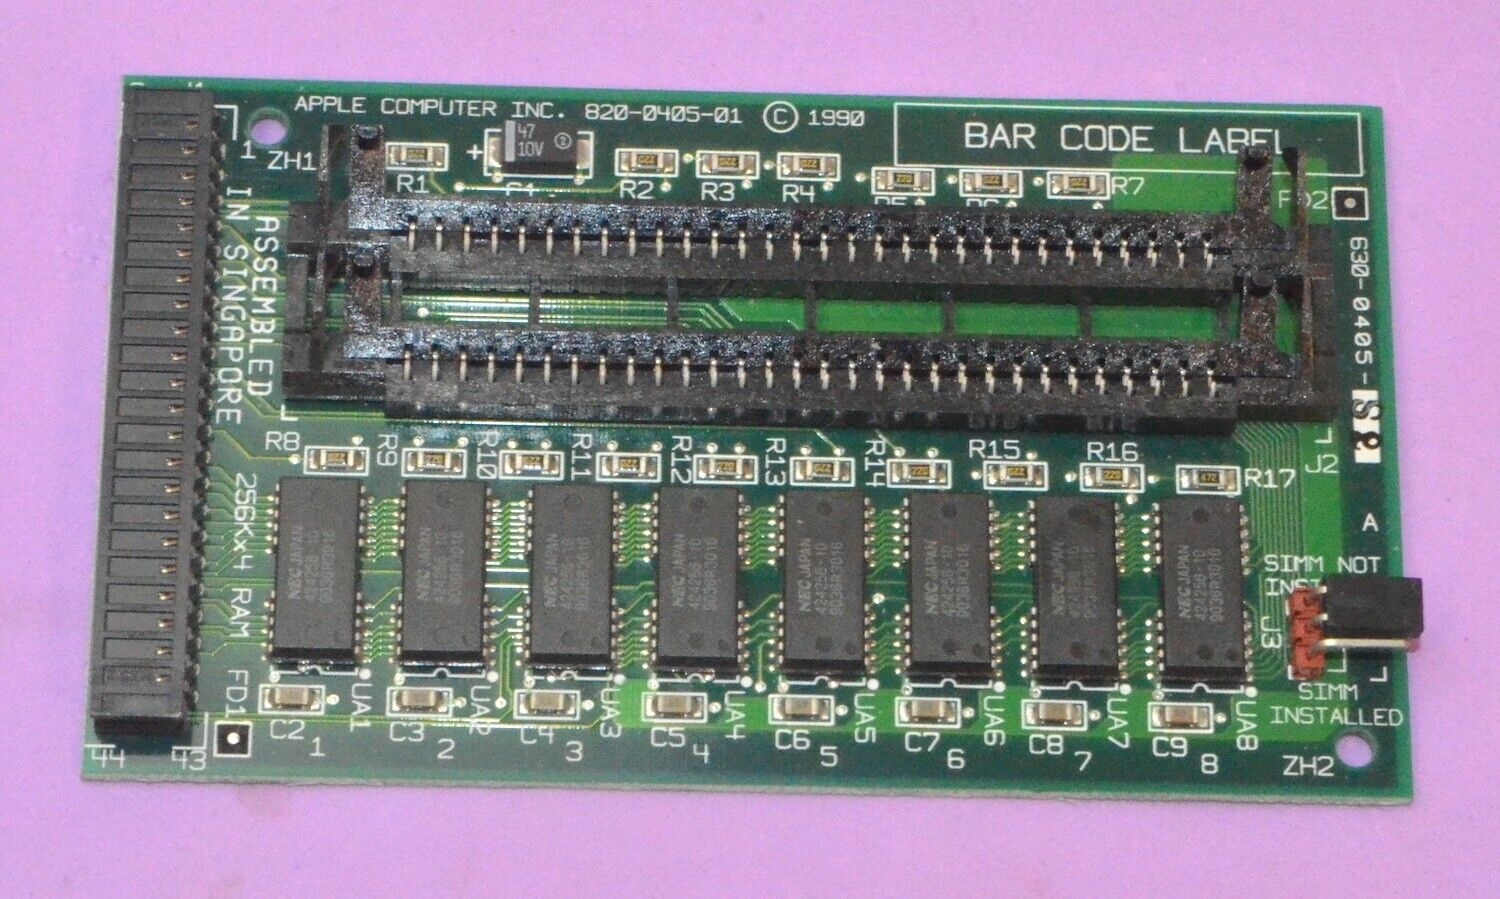 Apple Mac Classic Memory Expansion Board (Holds up to 3 MB) *Used* 820-0405-01